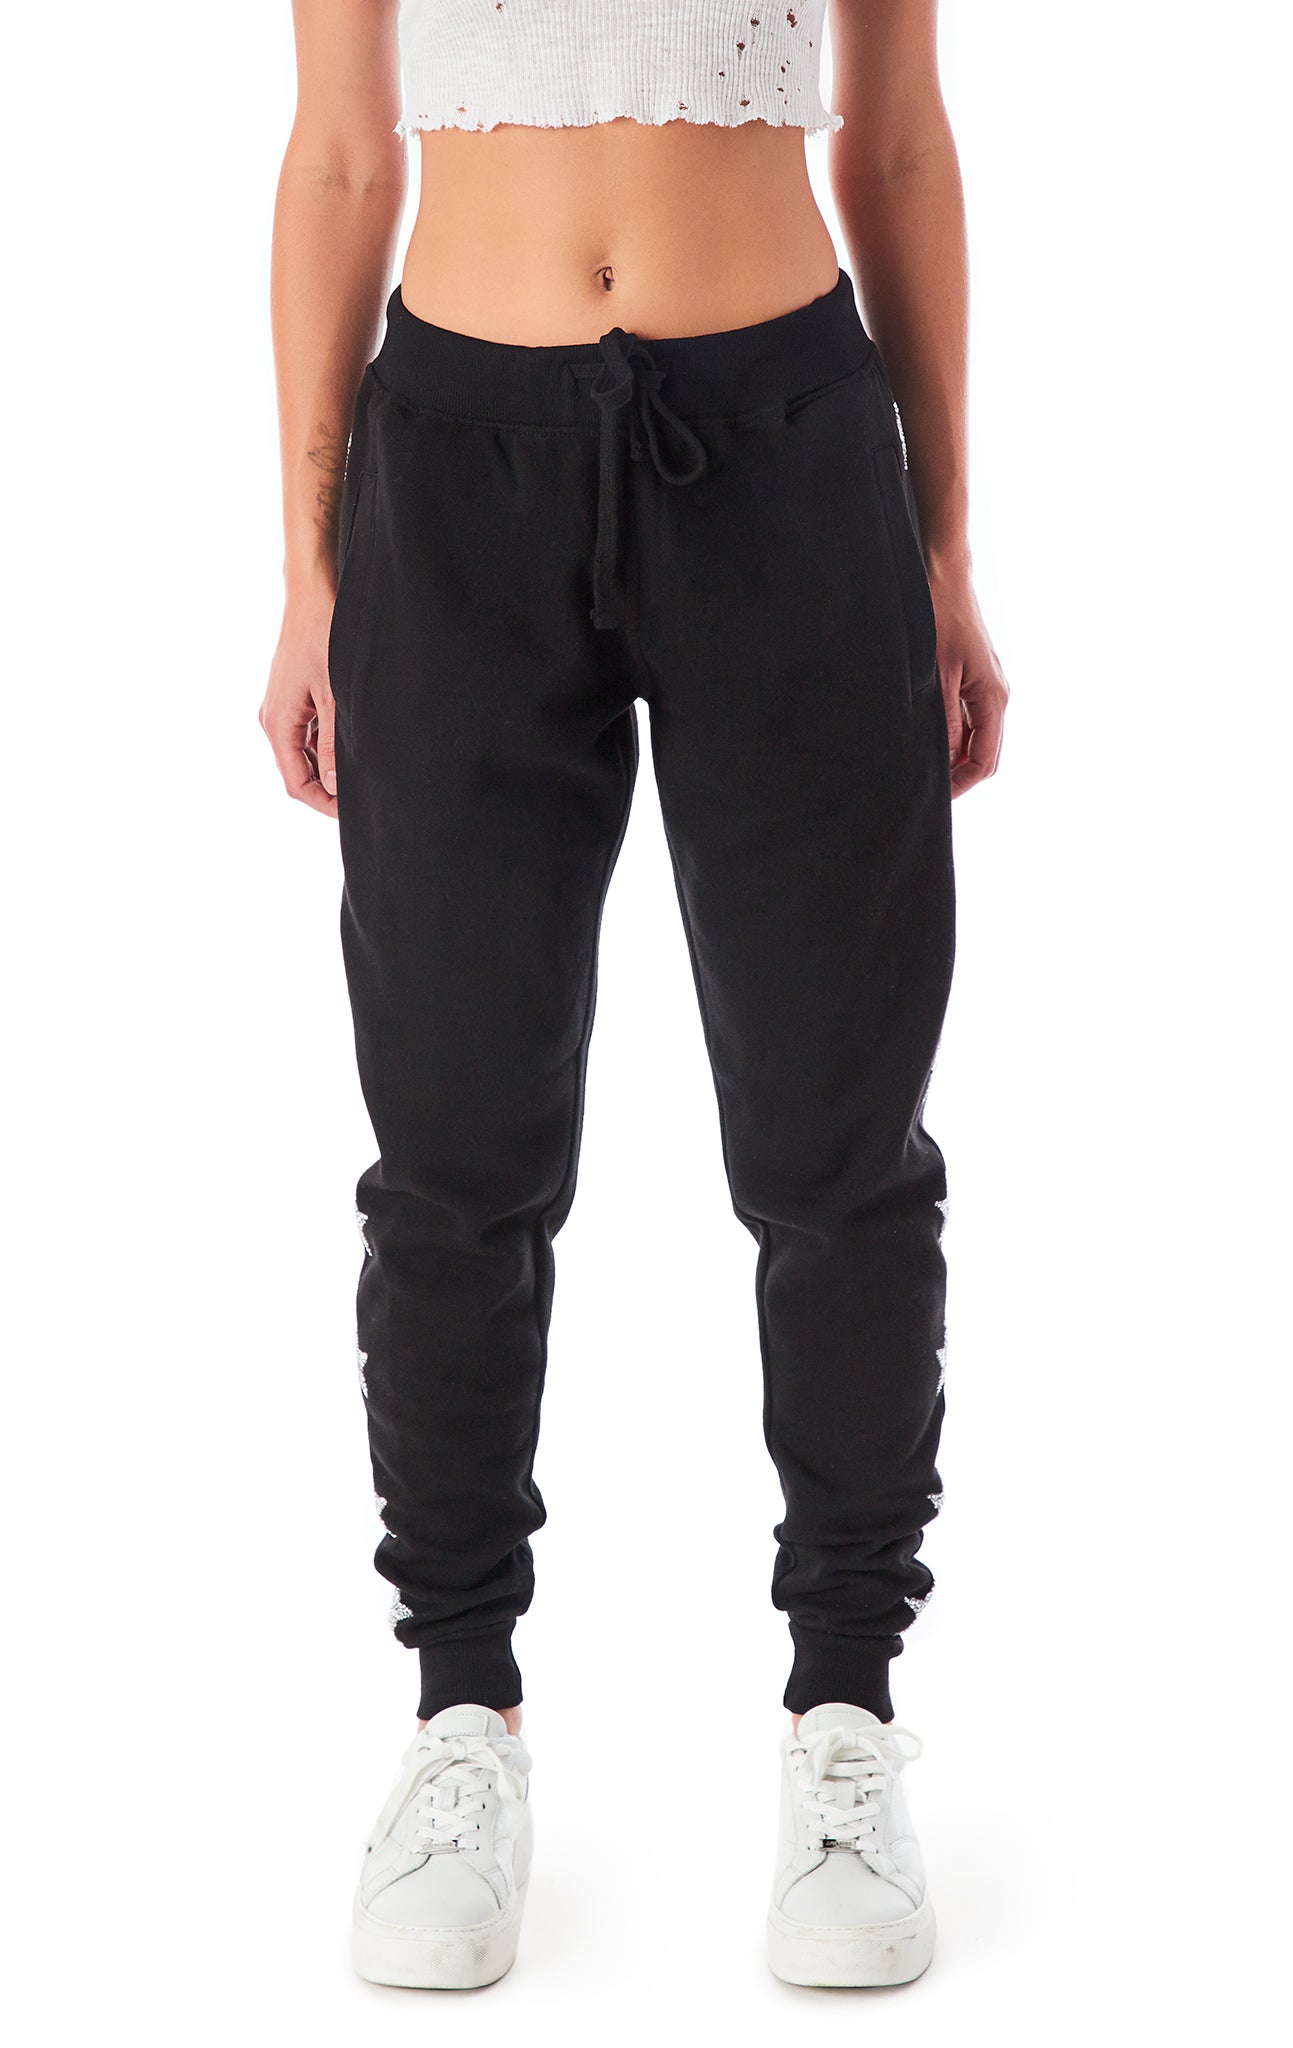 SILVER STAR PATCH SWEATPANTS – LF Stores